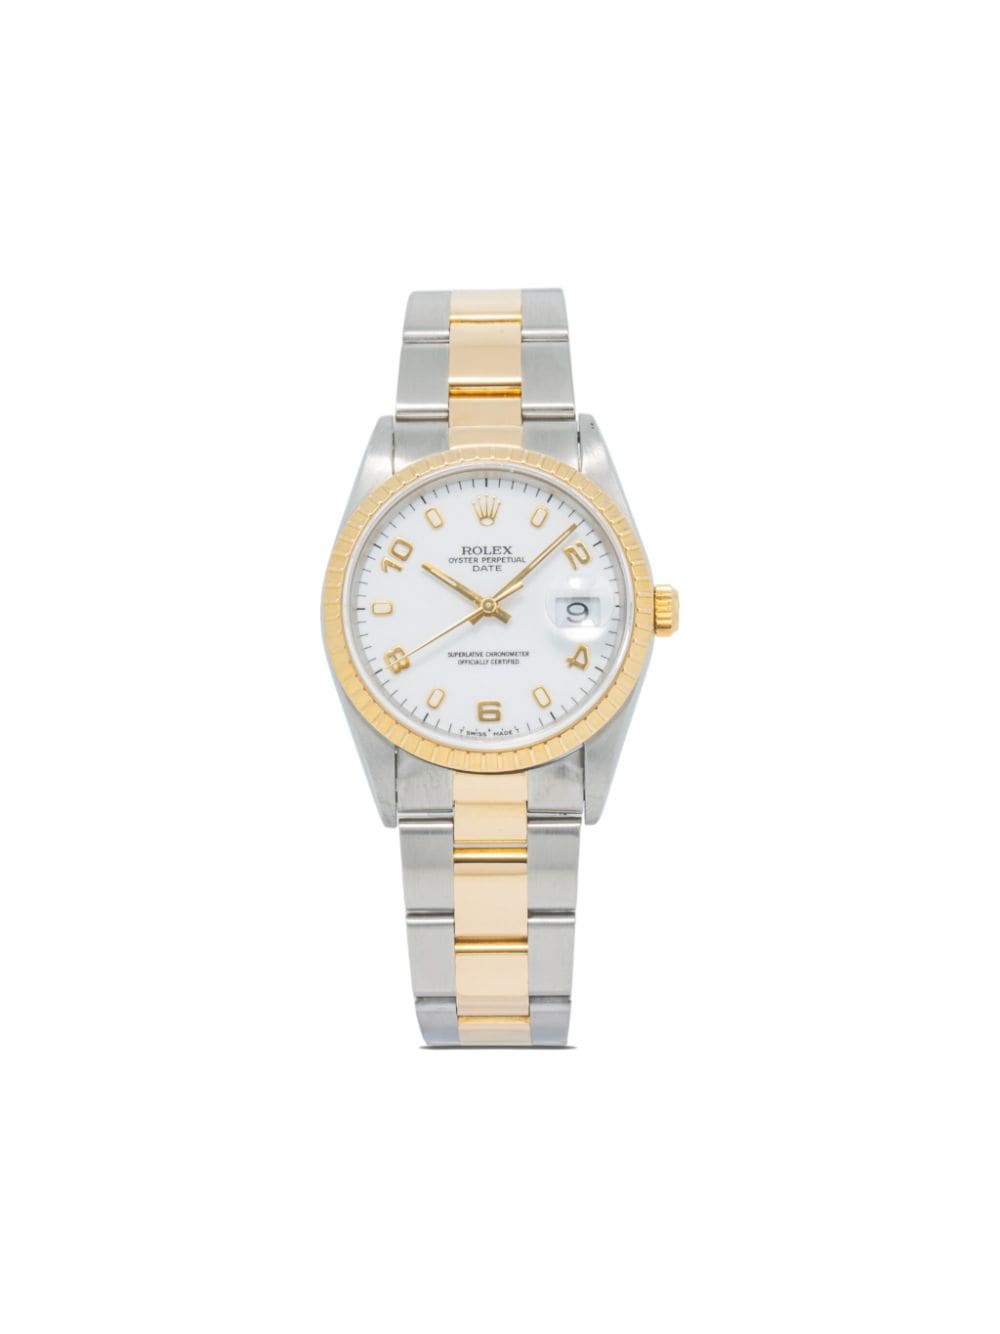 Rolex pre-owned Oyster Perpetual Date 34mm - White von Rolex